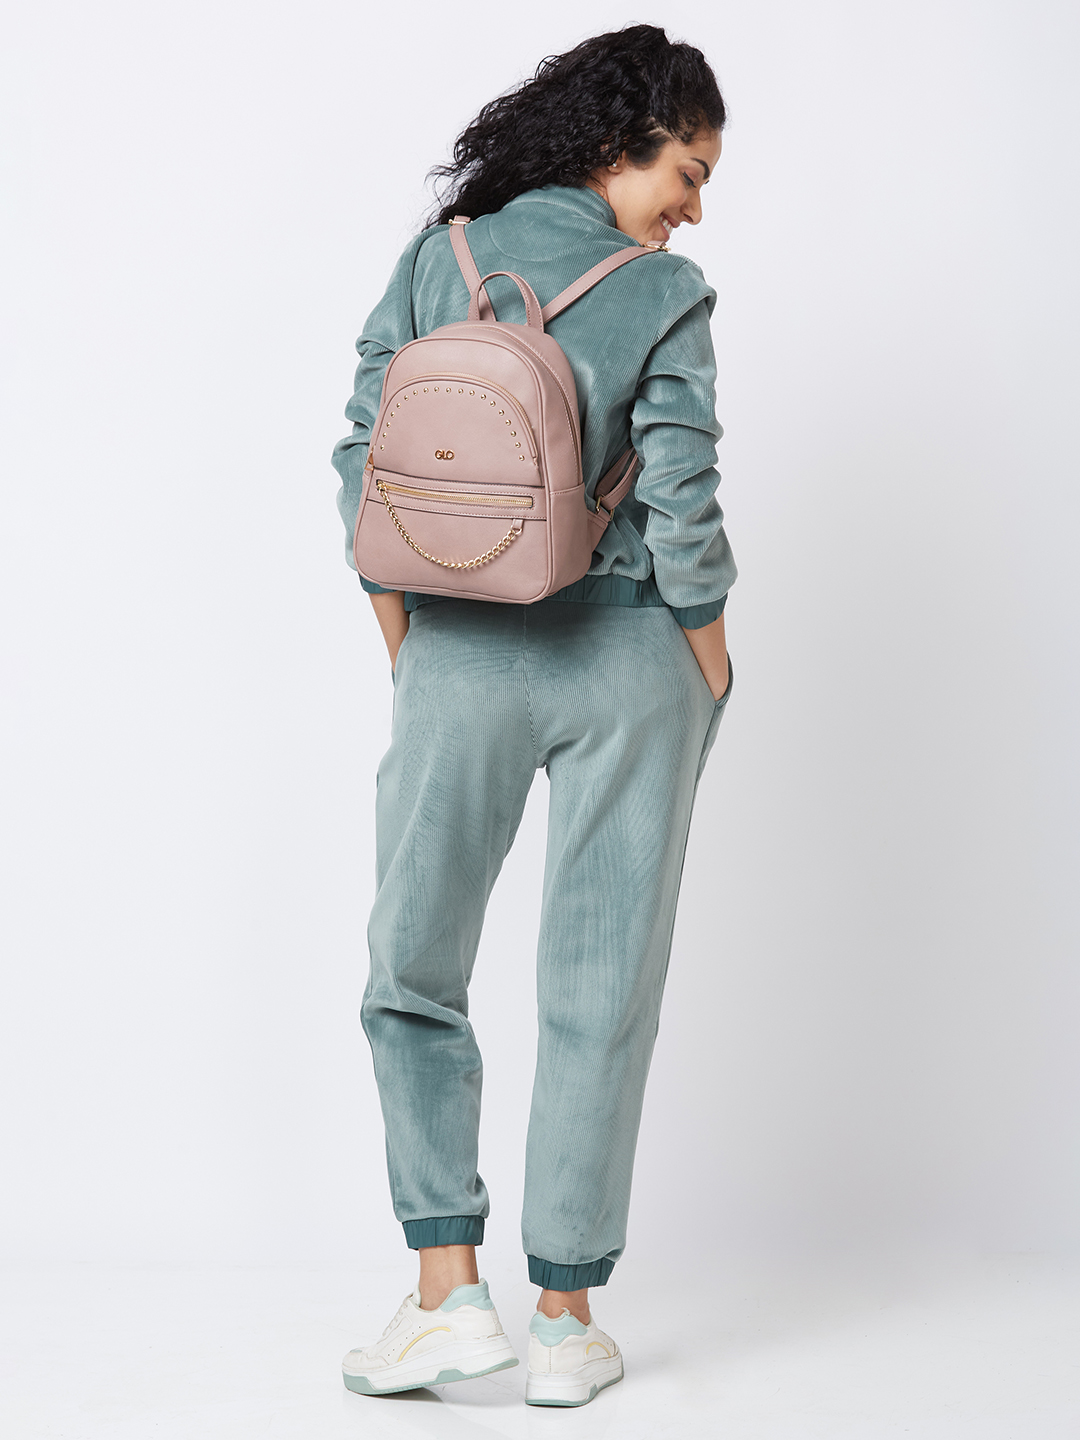 Globus Women Taupe Solid Smart Casual Backpack